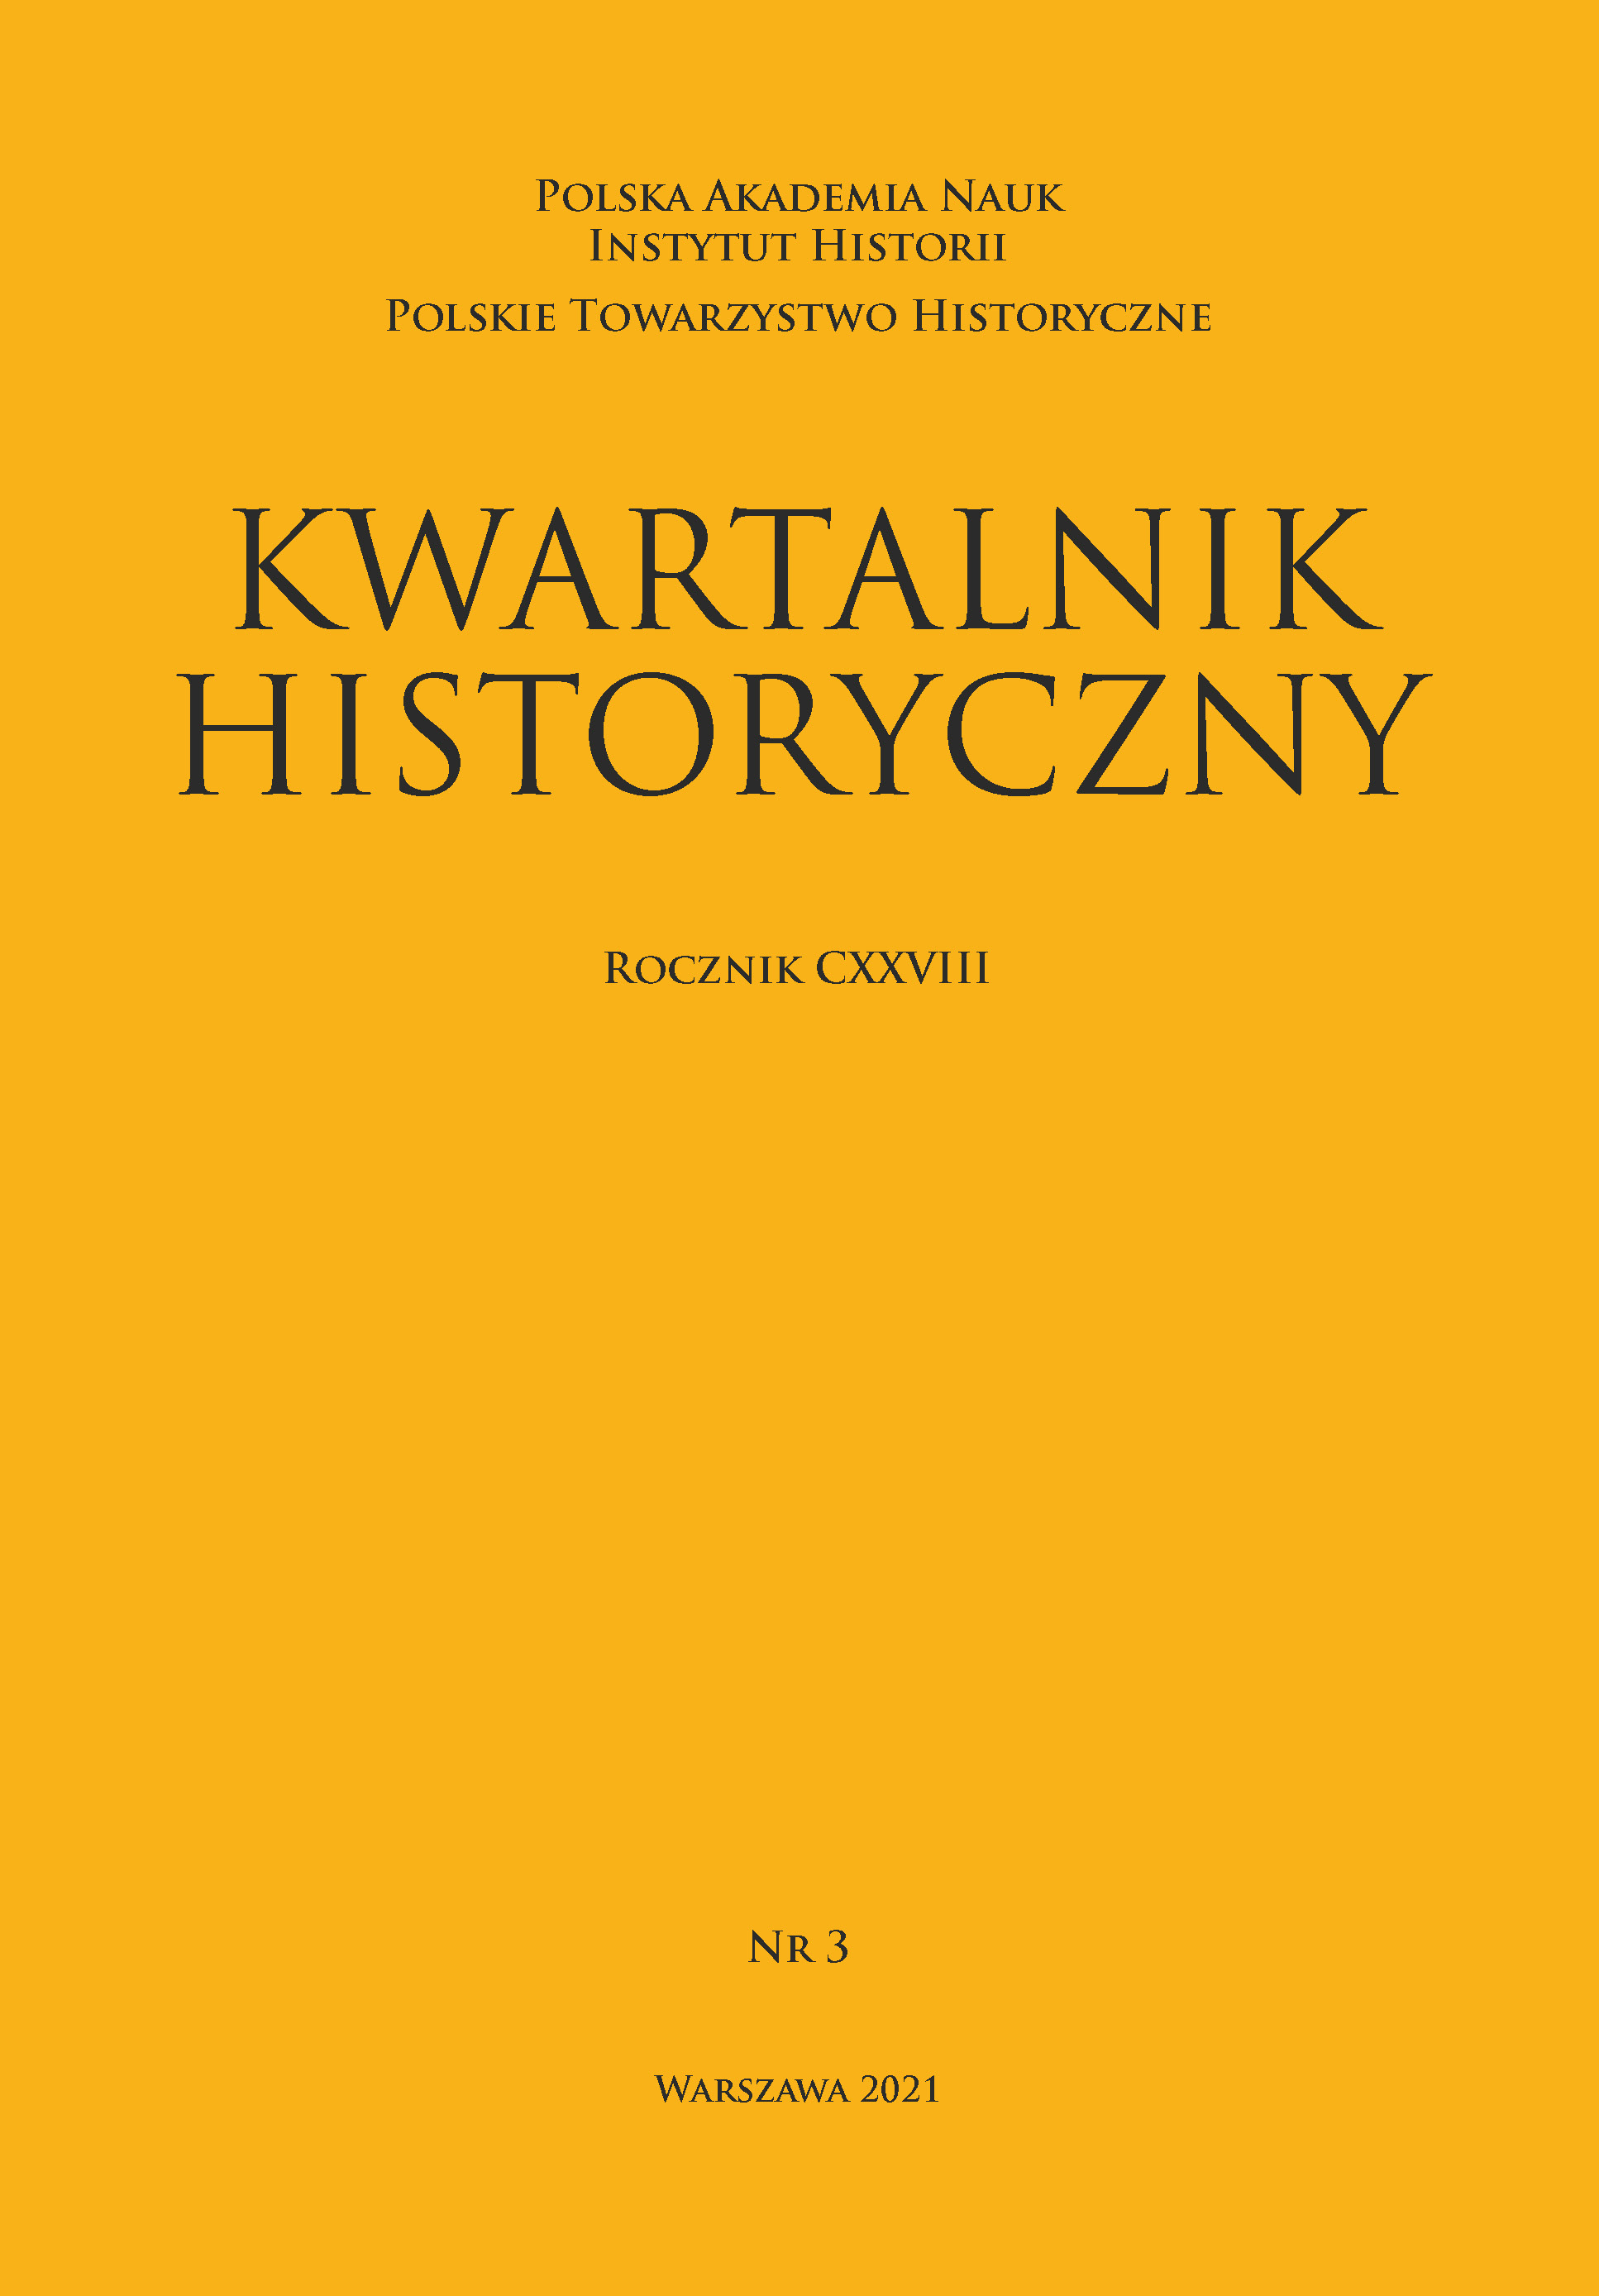 Between Historical Semantics and the Social Context of the Era — on the Political Language of the Polish Nobility Cover Image